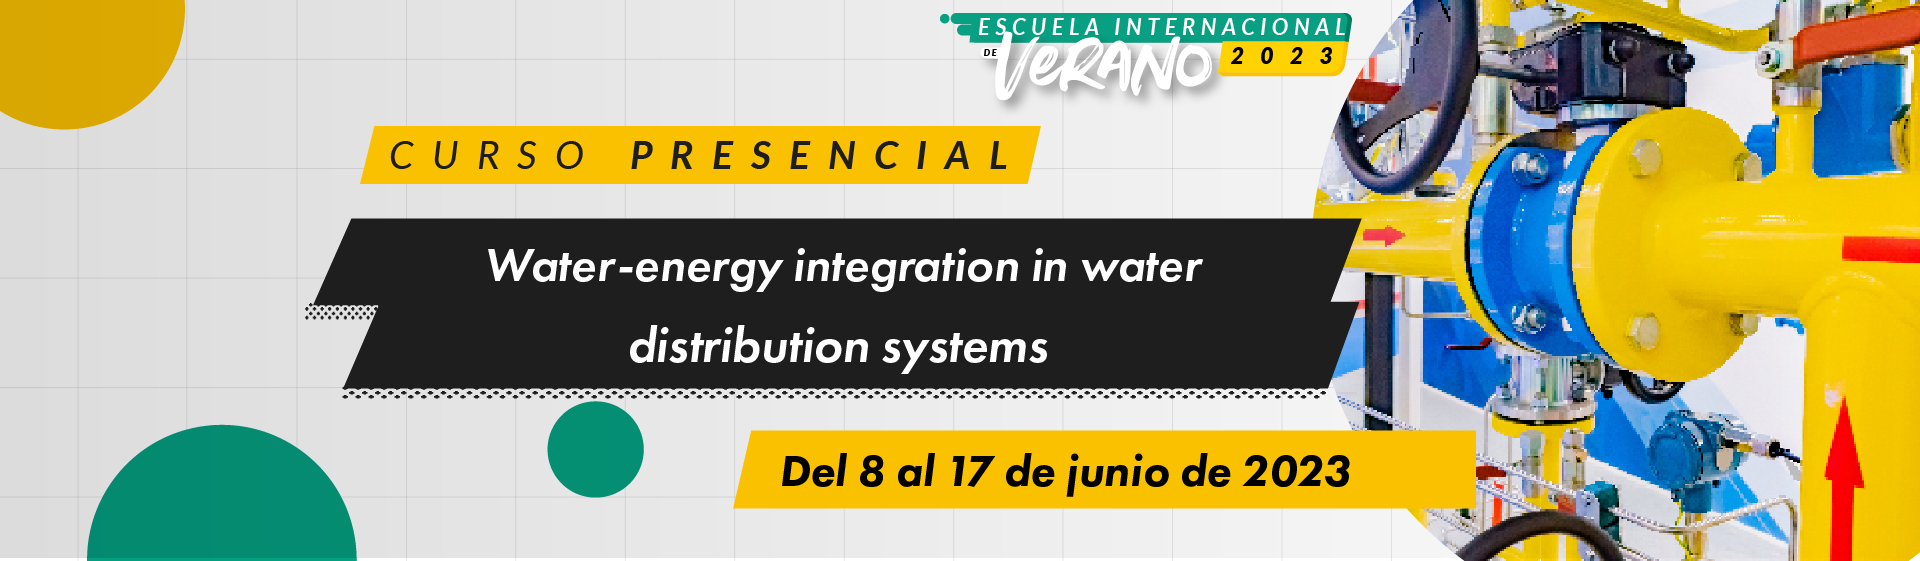 Water-energy integration in water distribution systems